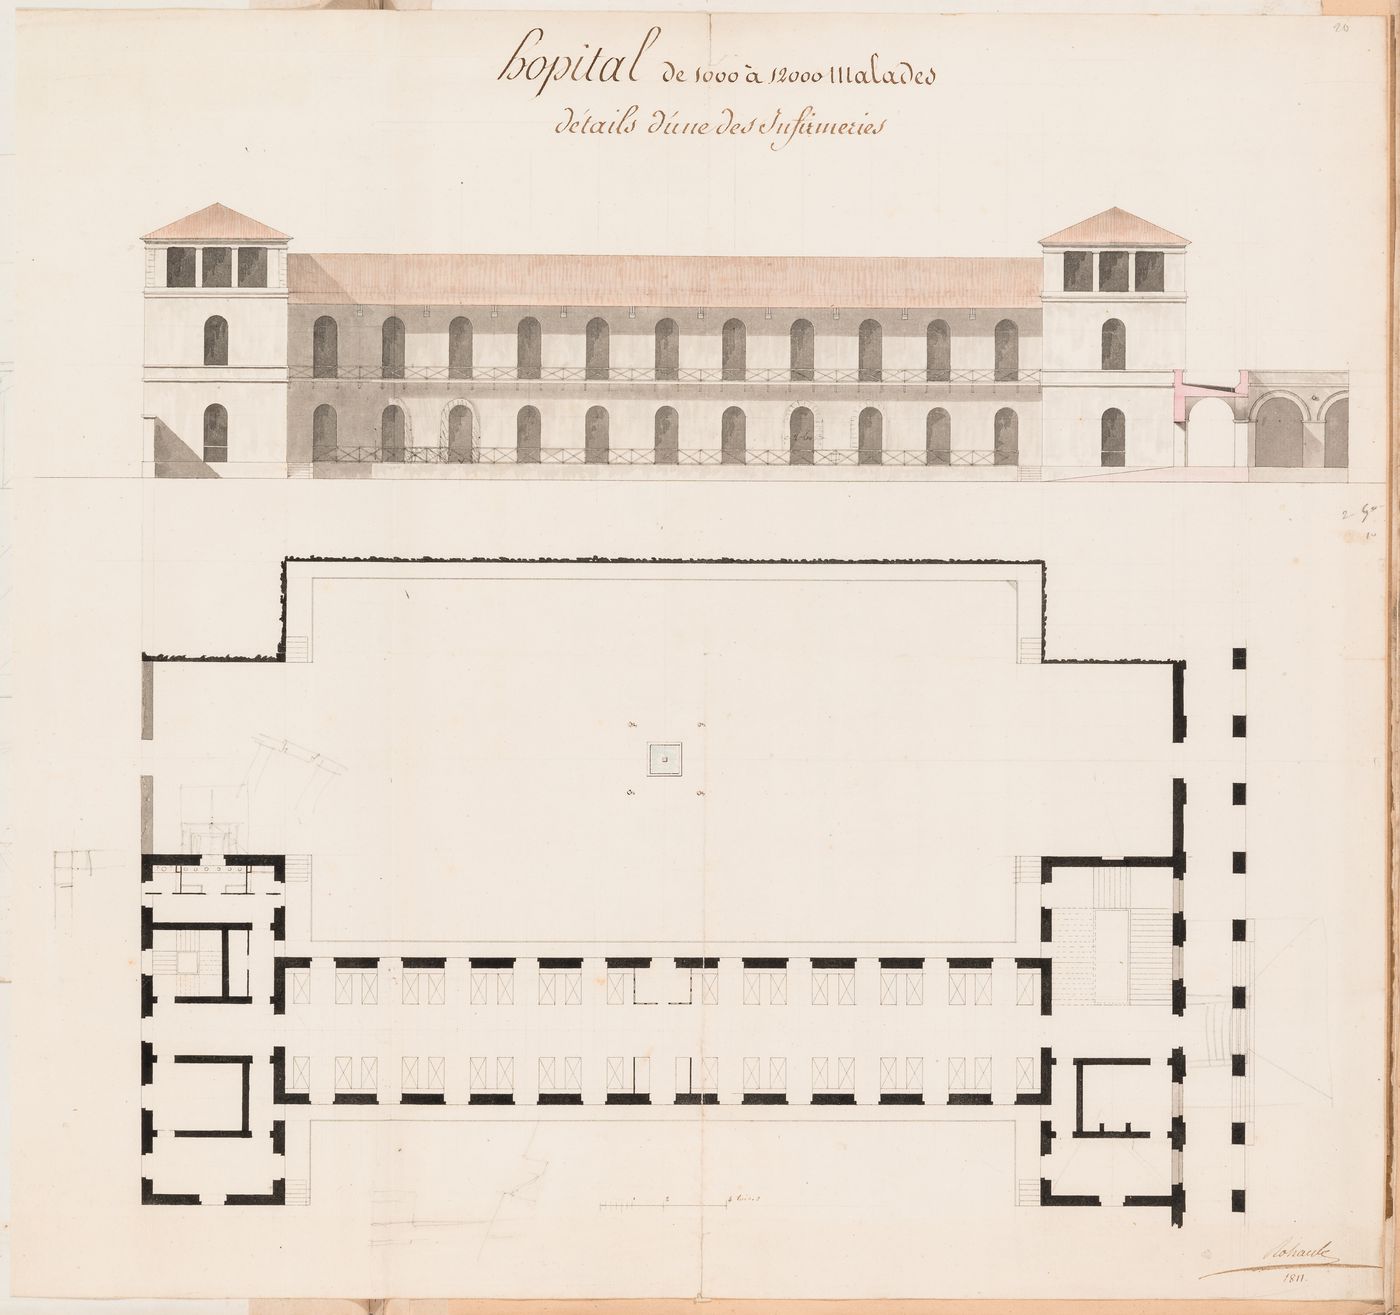 Ideal hospital for 1000 to 1200 patients, Paris: Elevation and plan for a ward